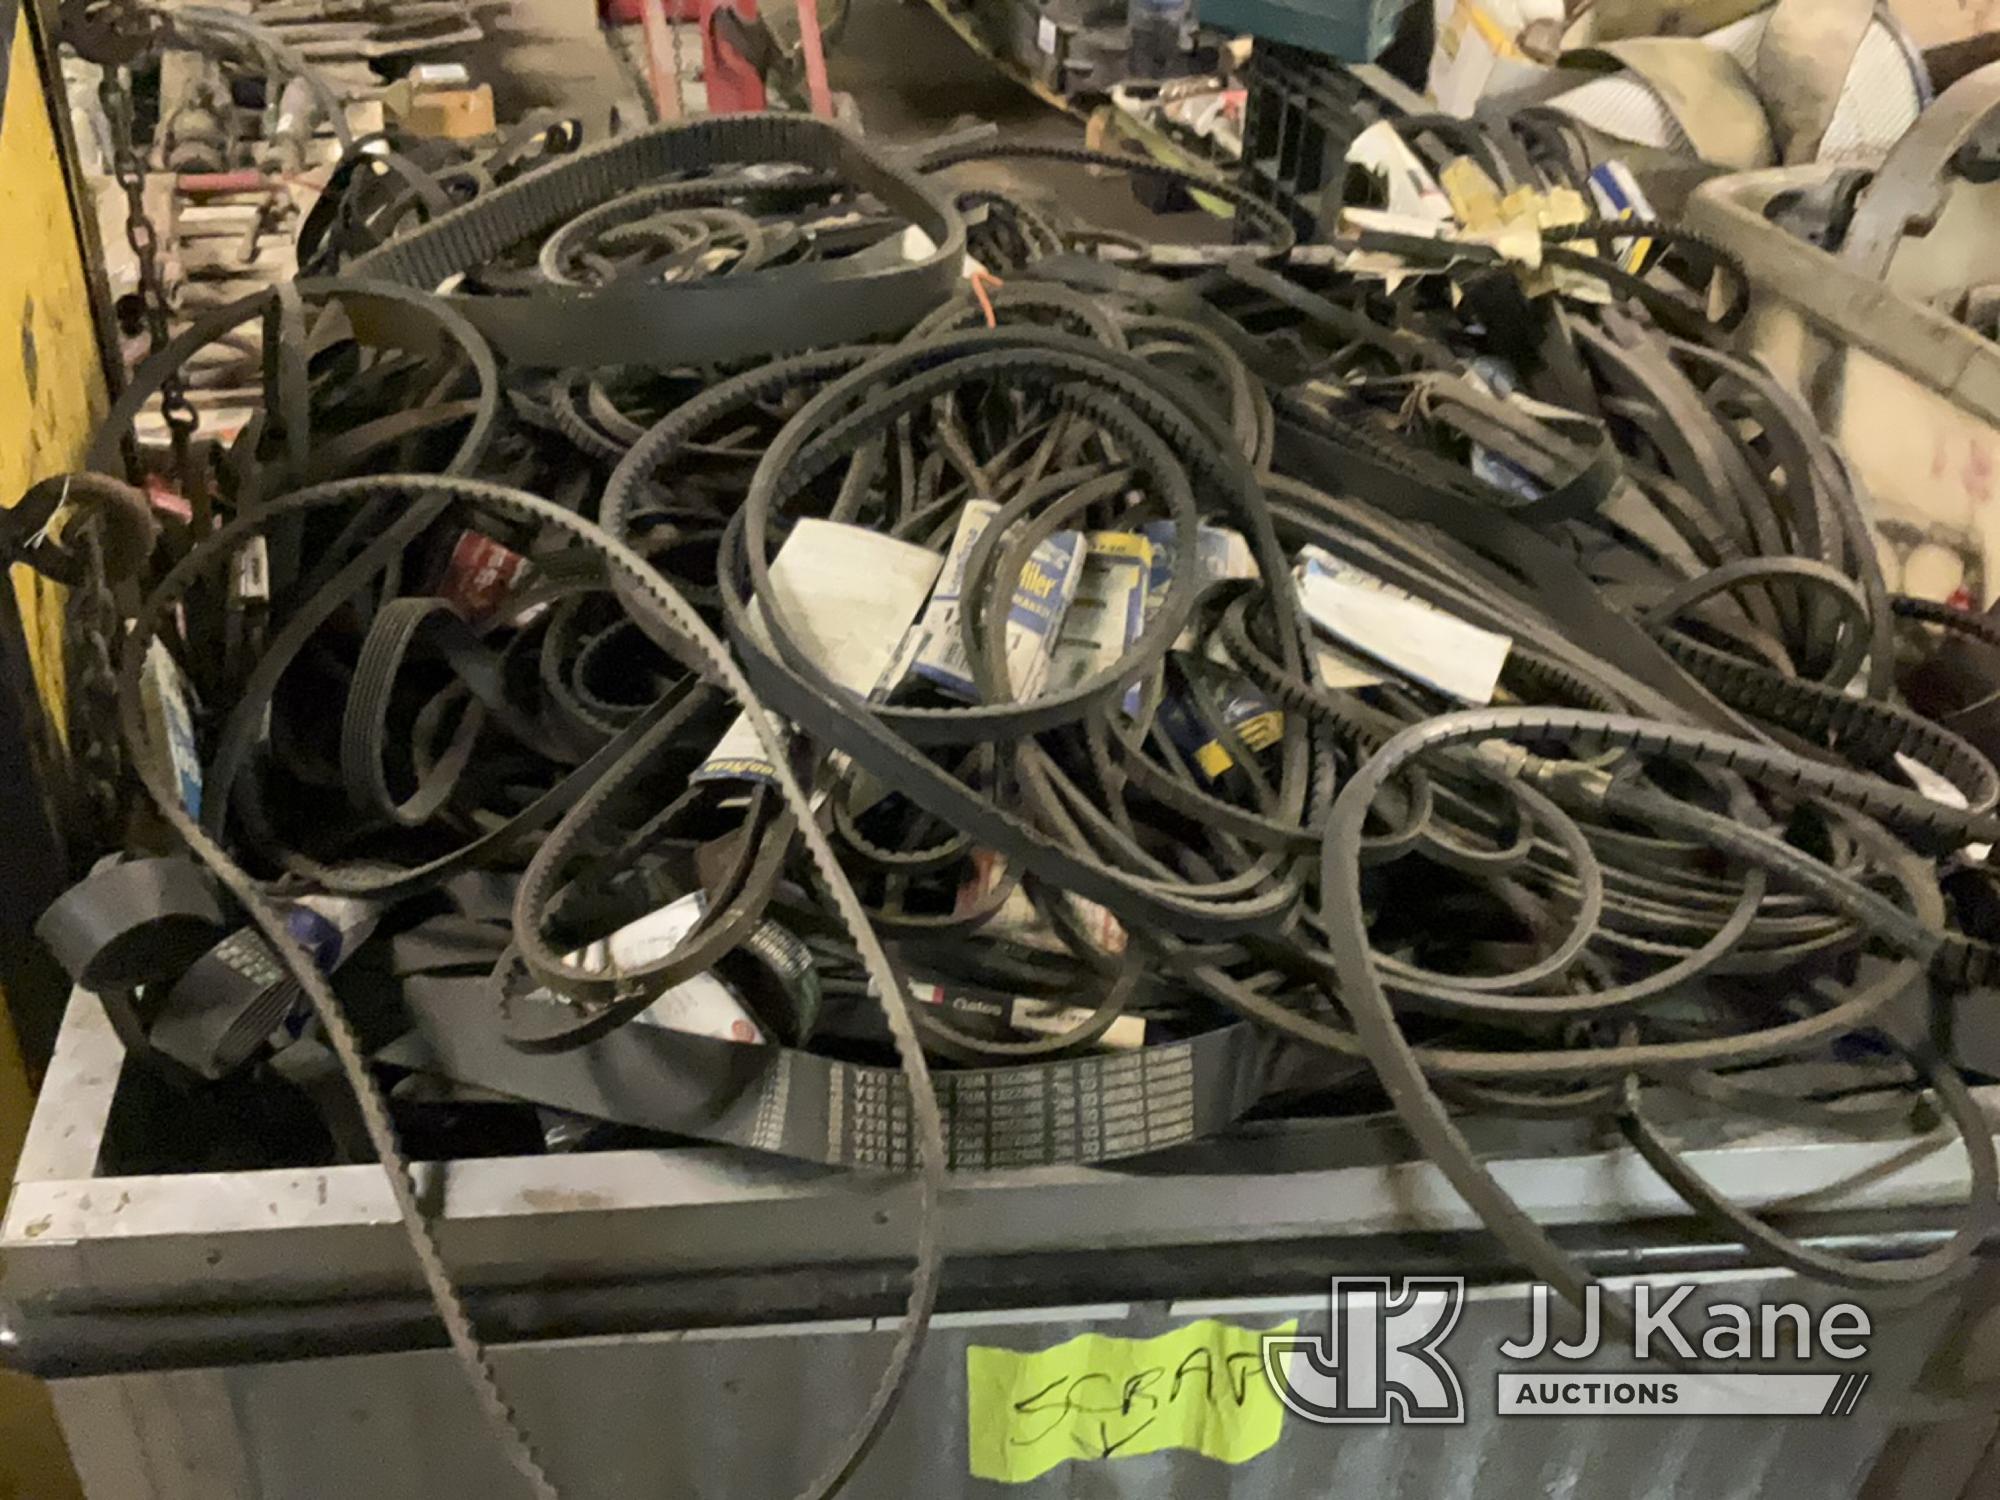 (Harvey, IL) 2 Bins Miscellaneous Rubber Belts NOTE: This unit is being sold AS IS/WHERE IS via Time